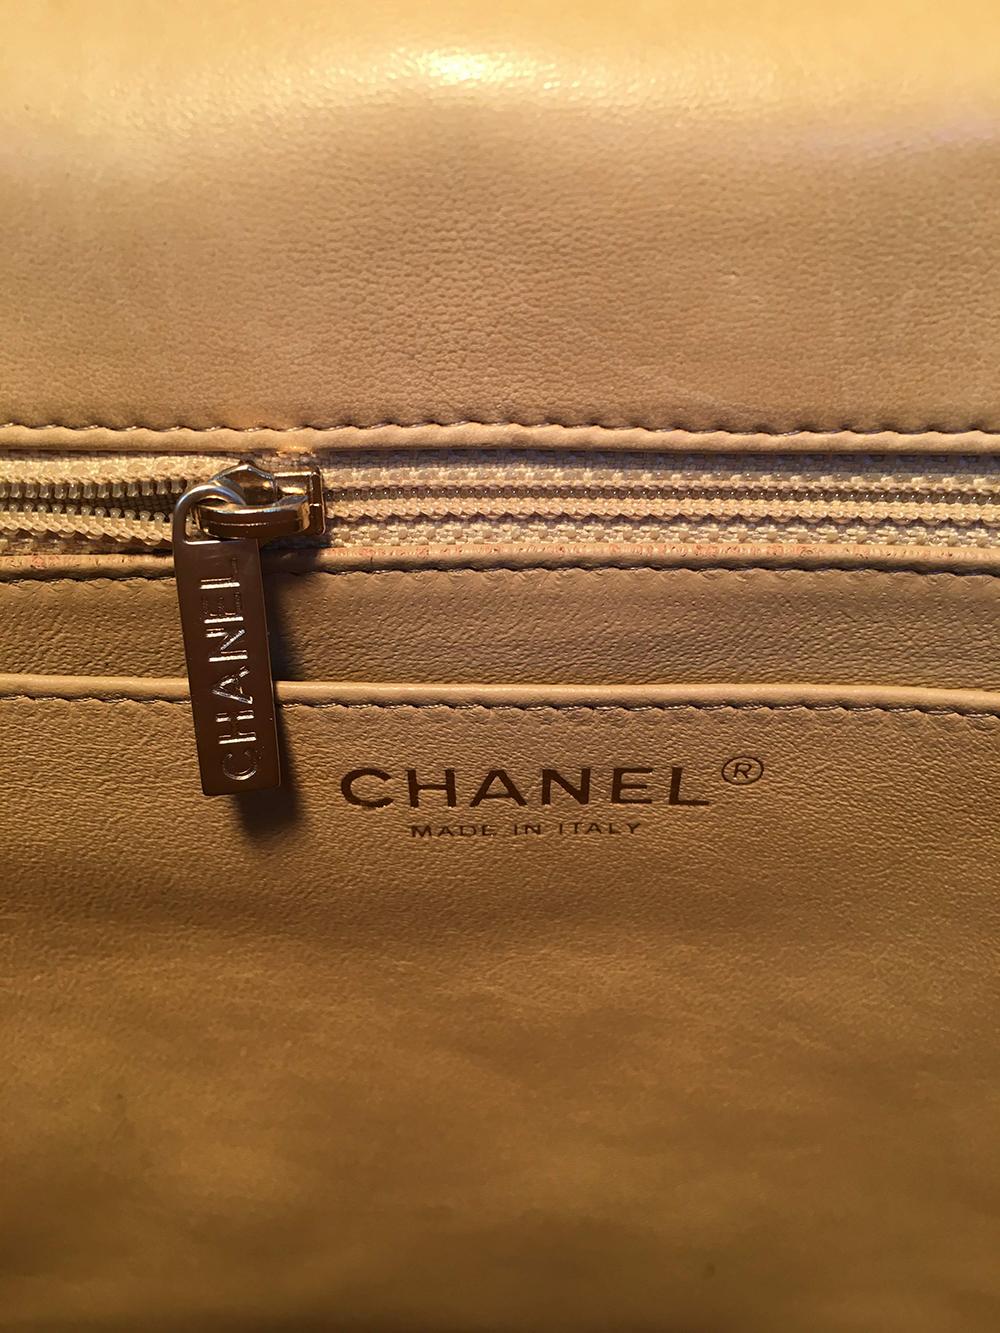 Chanel Nude Gold Pearlized Patent Leather Maxi Classic Flap Shoulder bag 4